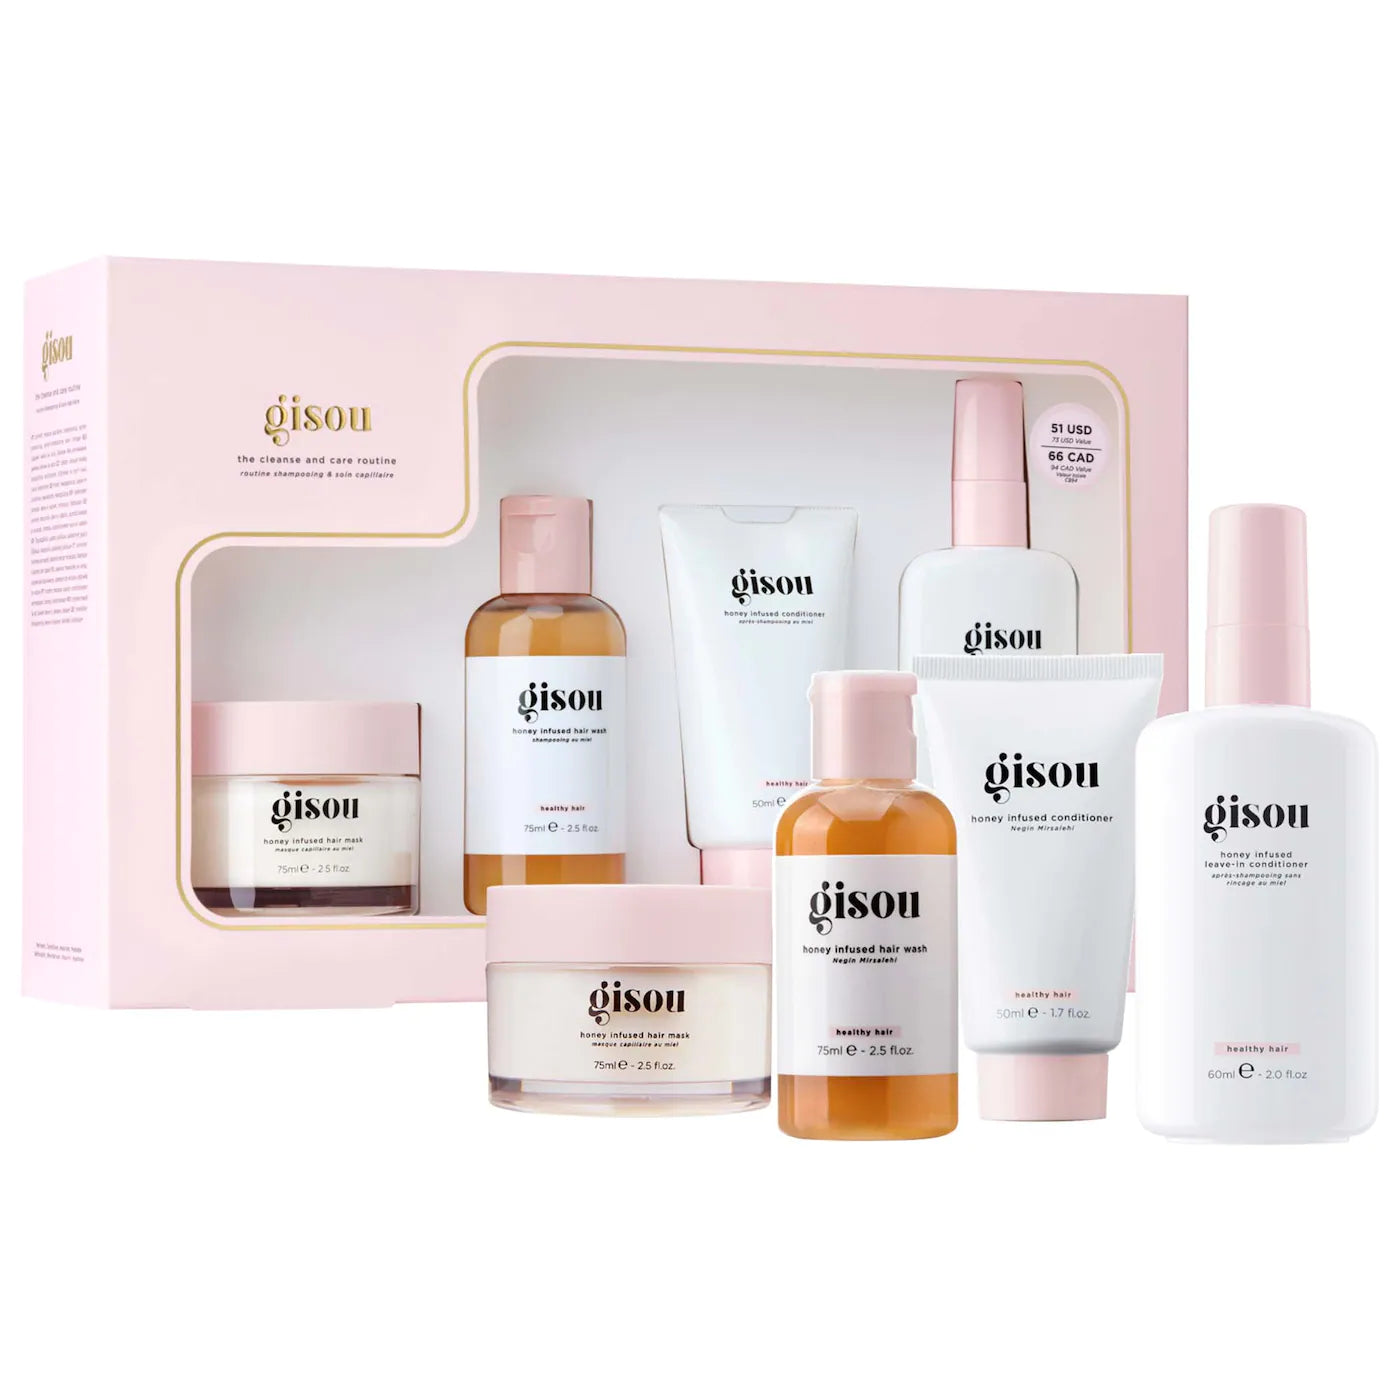 Gisou | Honey Infused Hydrating Cleanse & Care Routine Hair Set